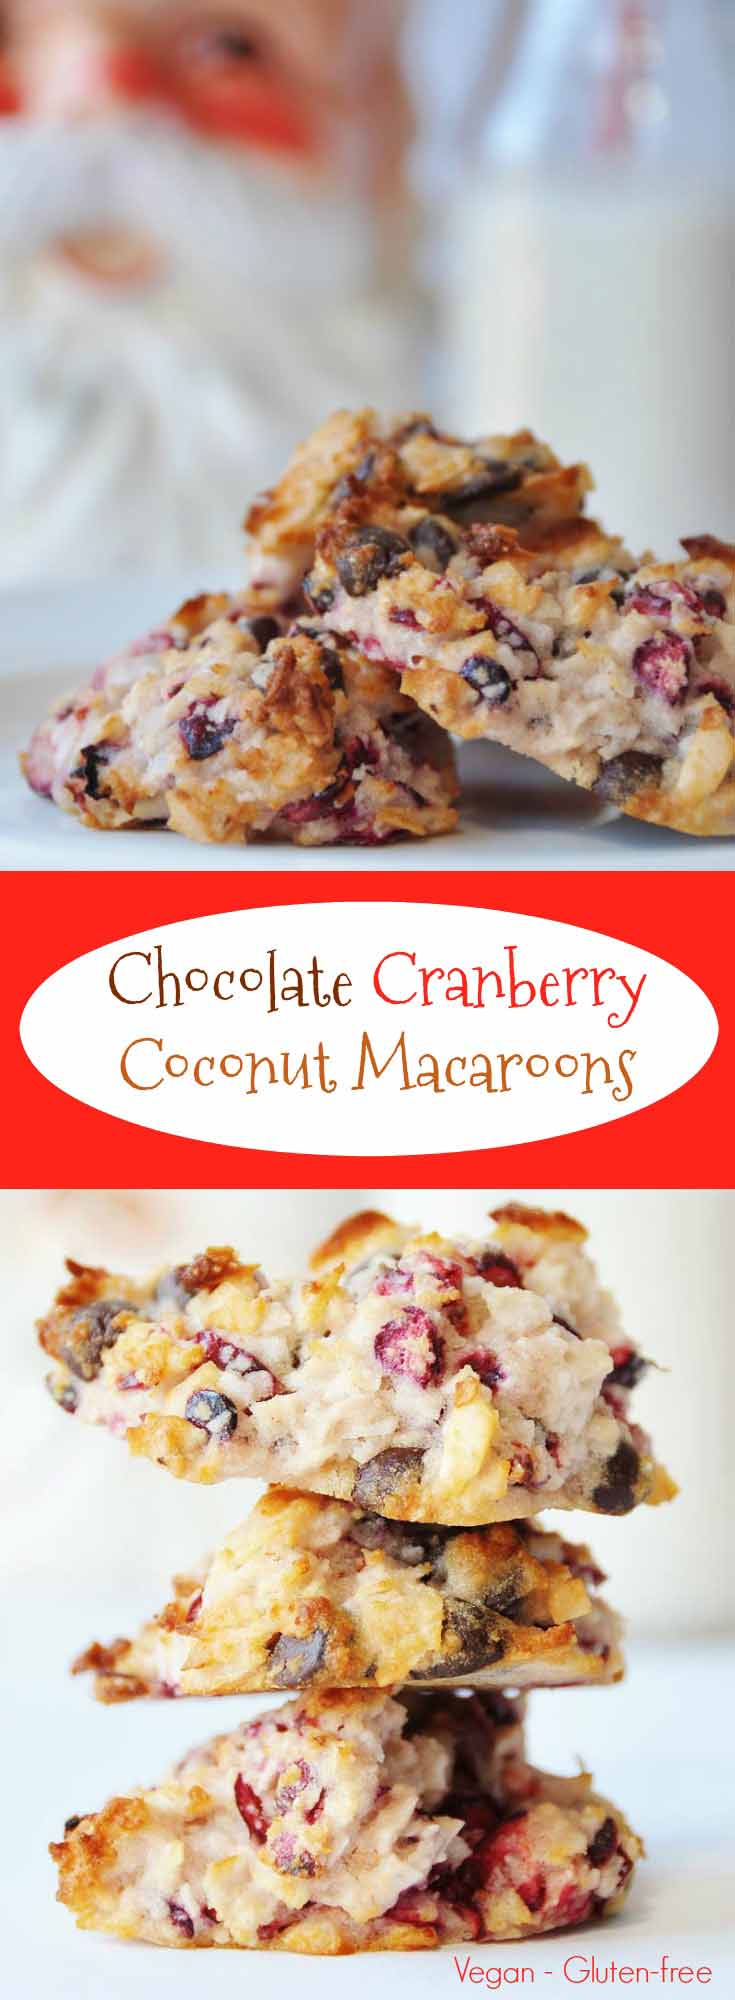 Gluten-free and vegan chocolate cranberry coconut macaroons cookie recipe! Perfect for the holidays! www.veganosity.com